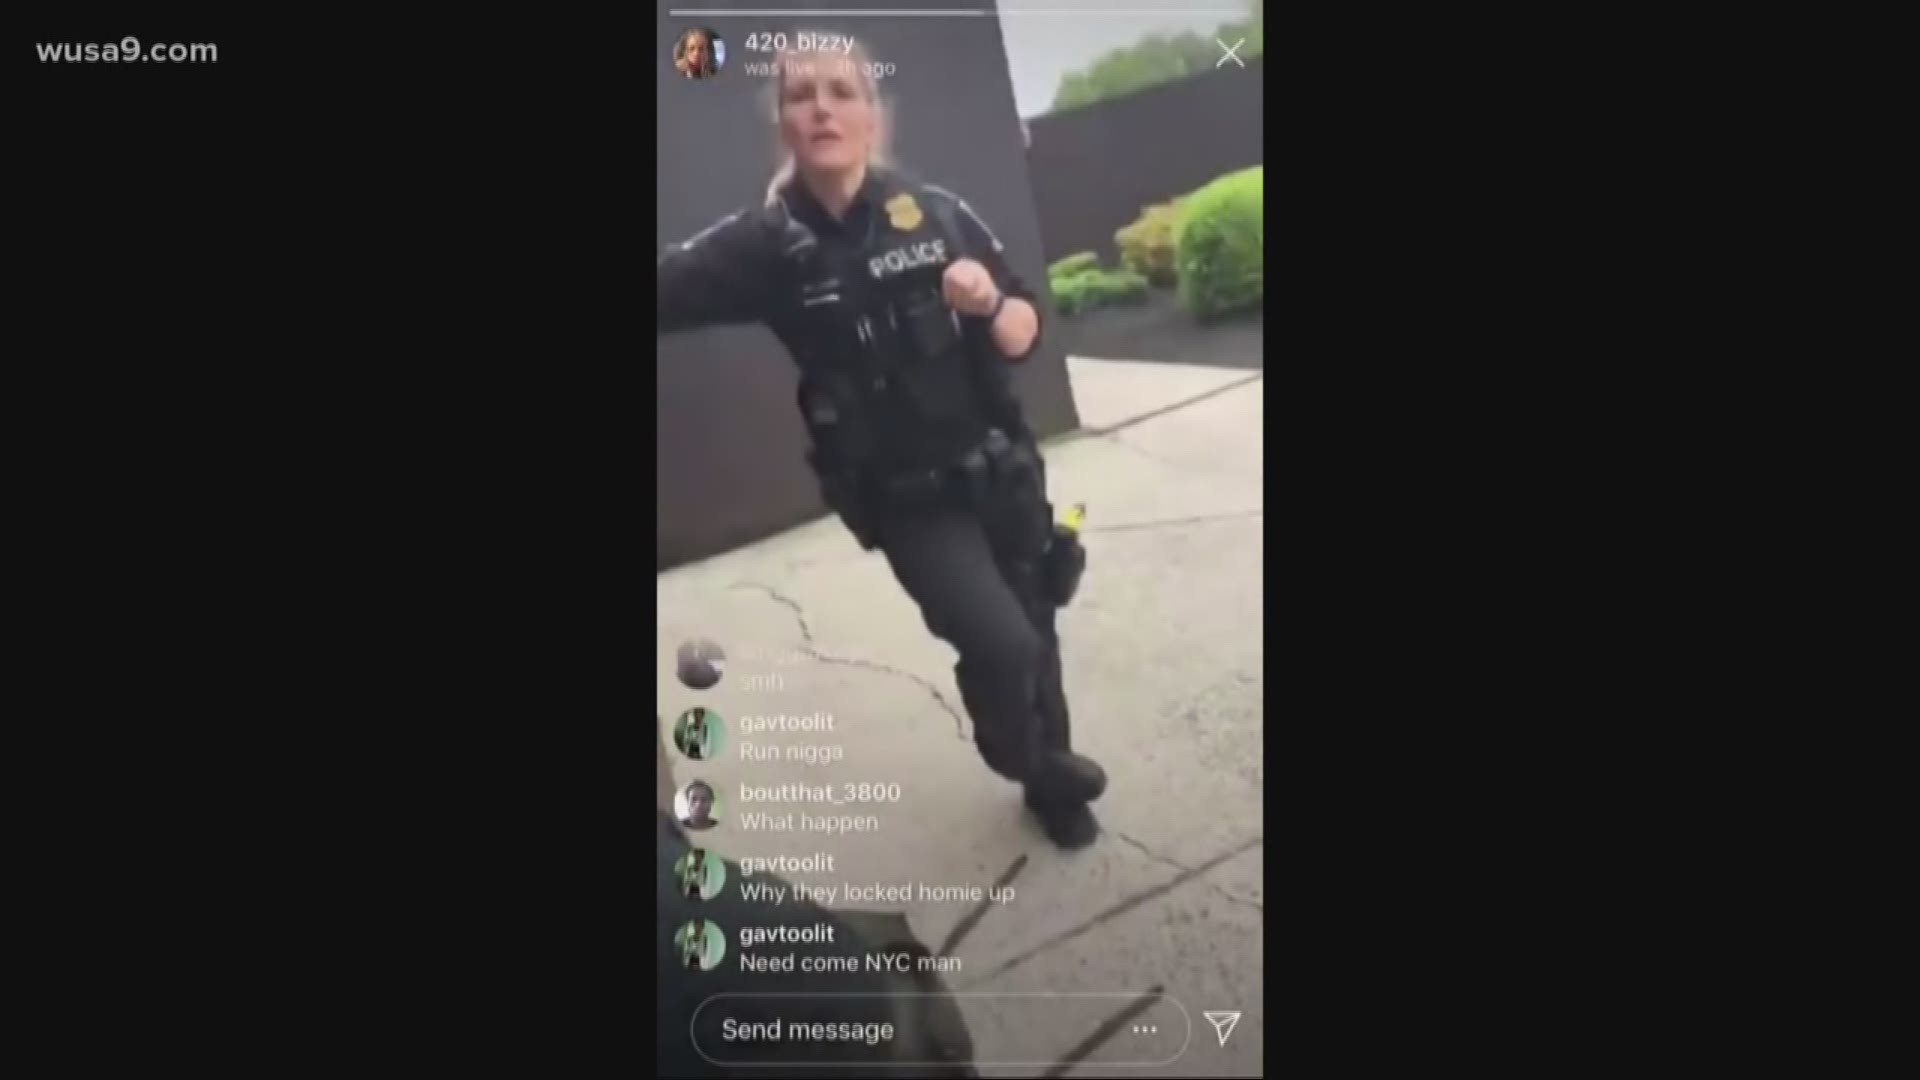 Video on Instagram shows white female officer using N-word. MCPD officials say they are investigating the video.